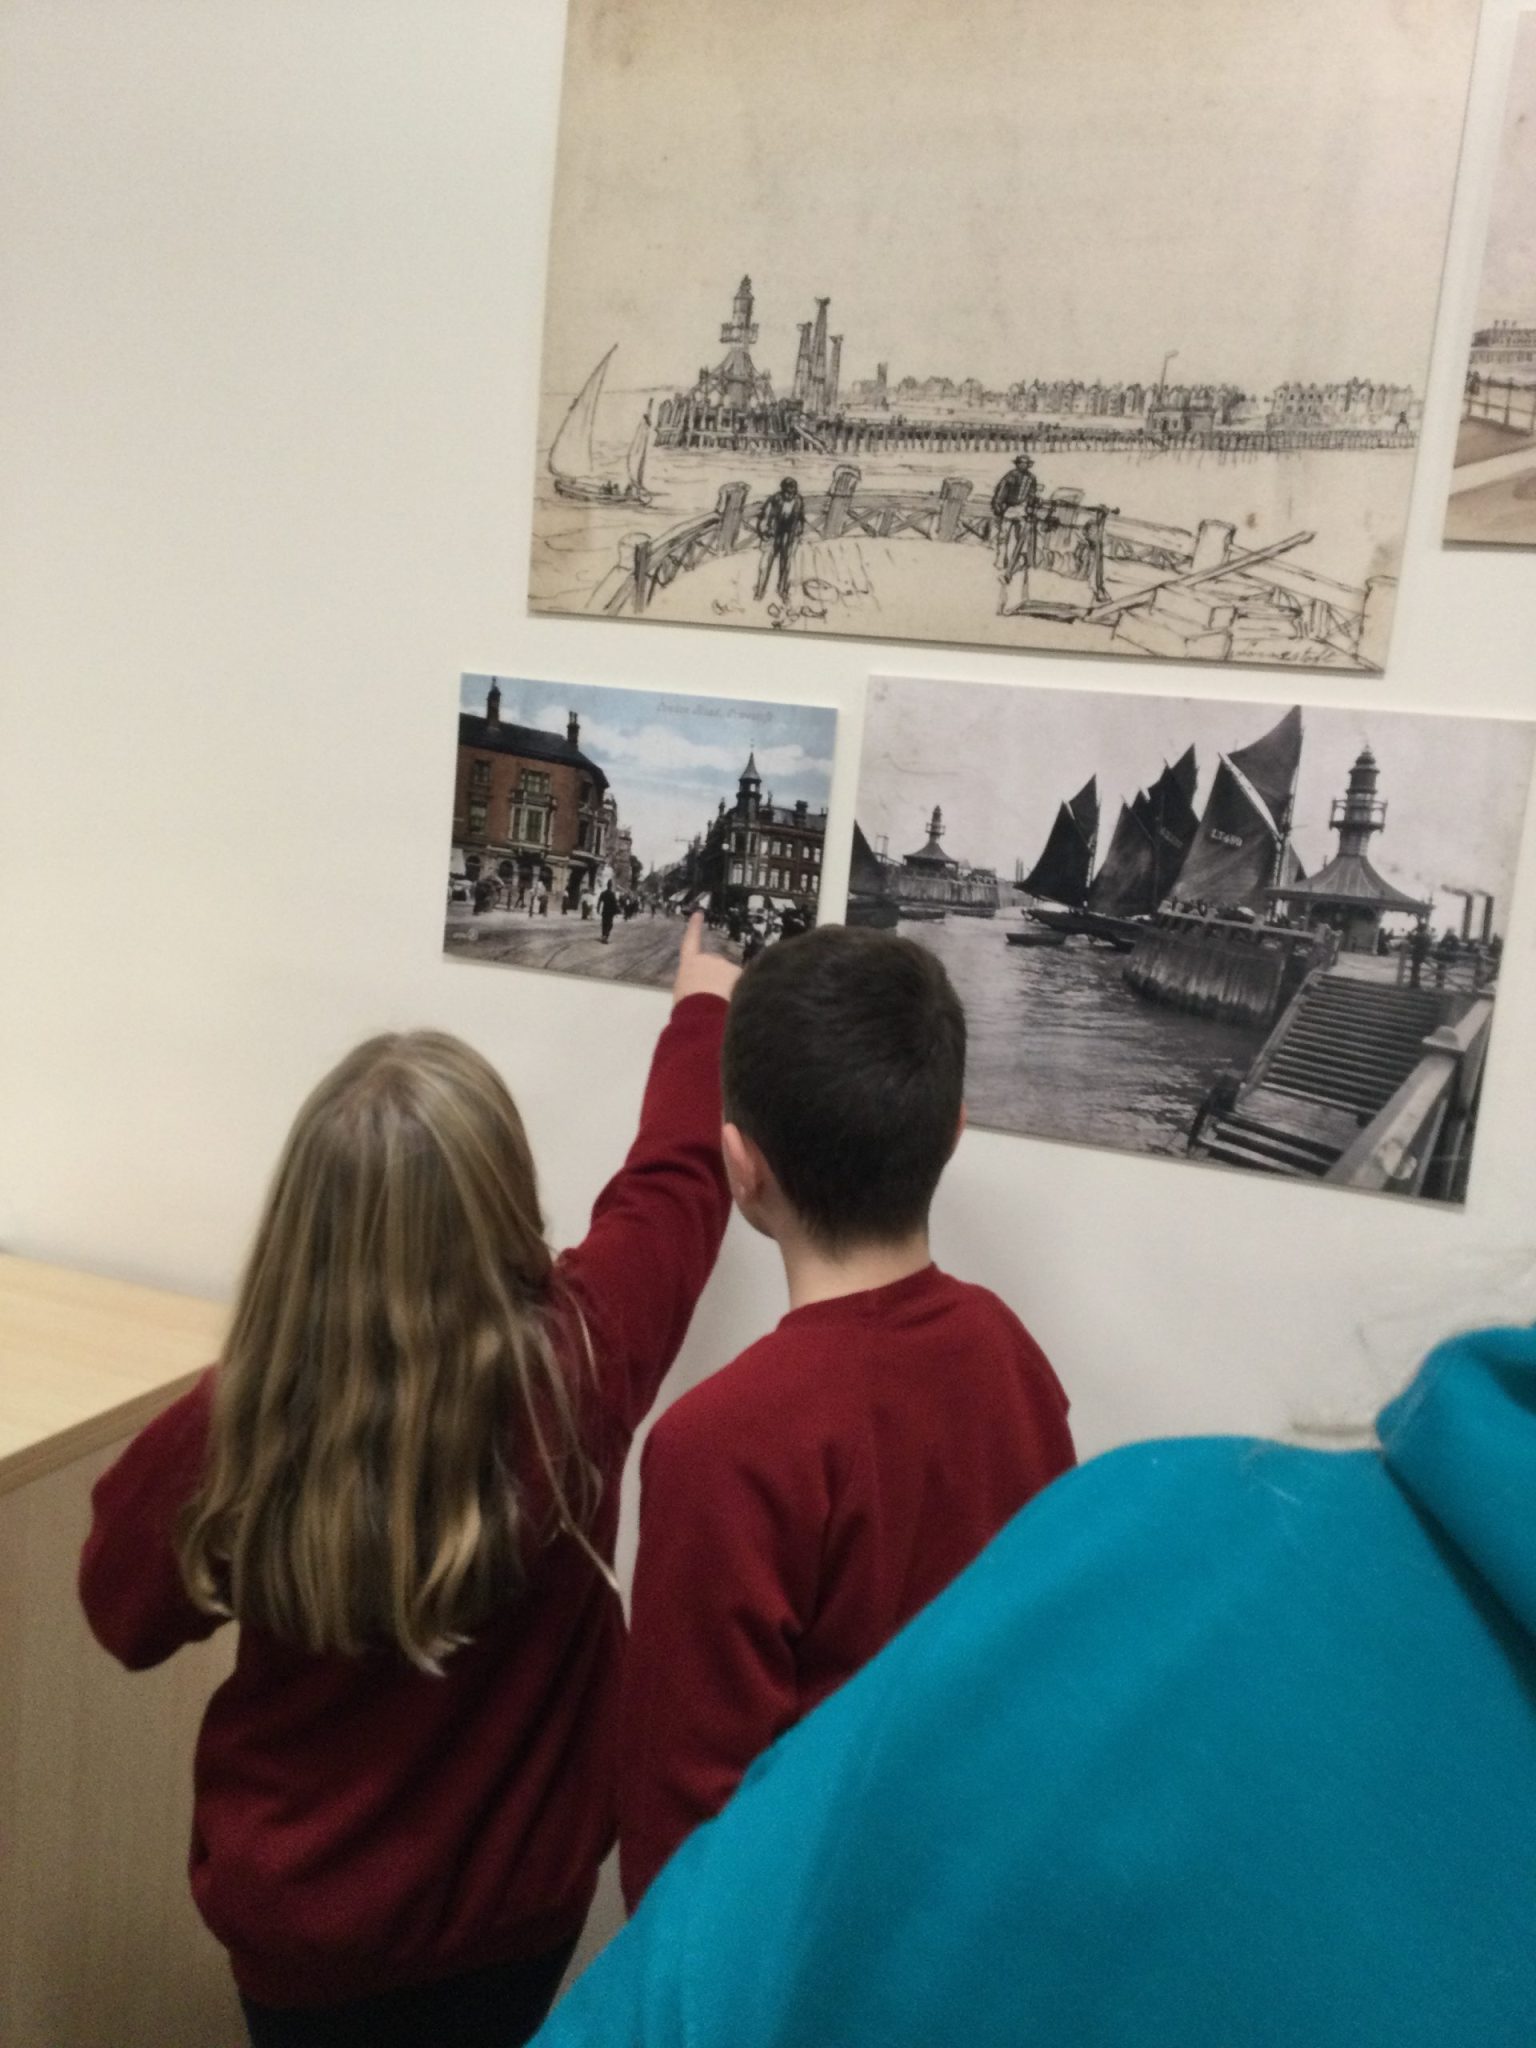 Two school children examining images of Lowestoft